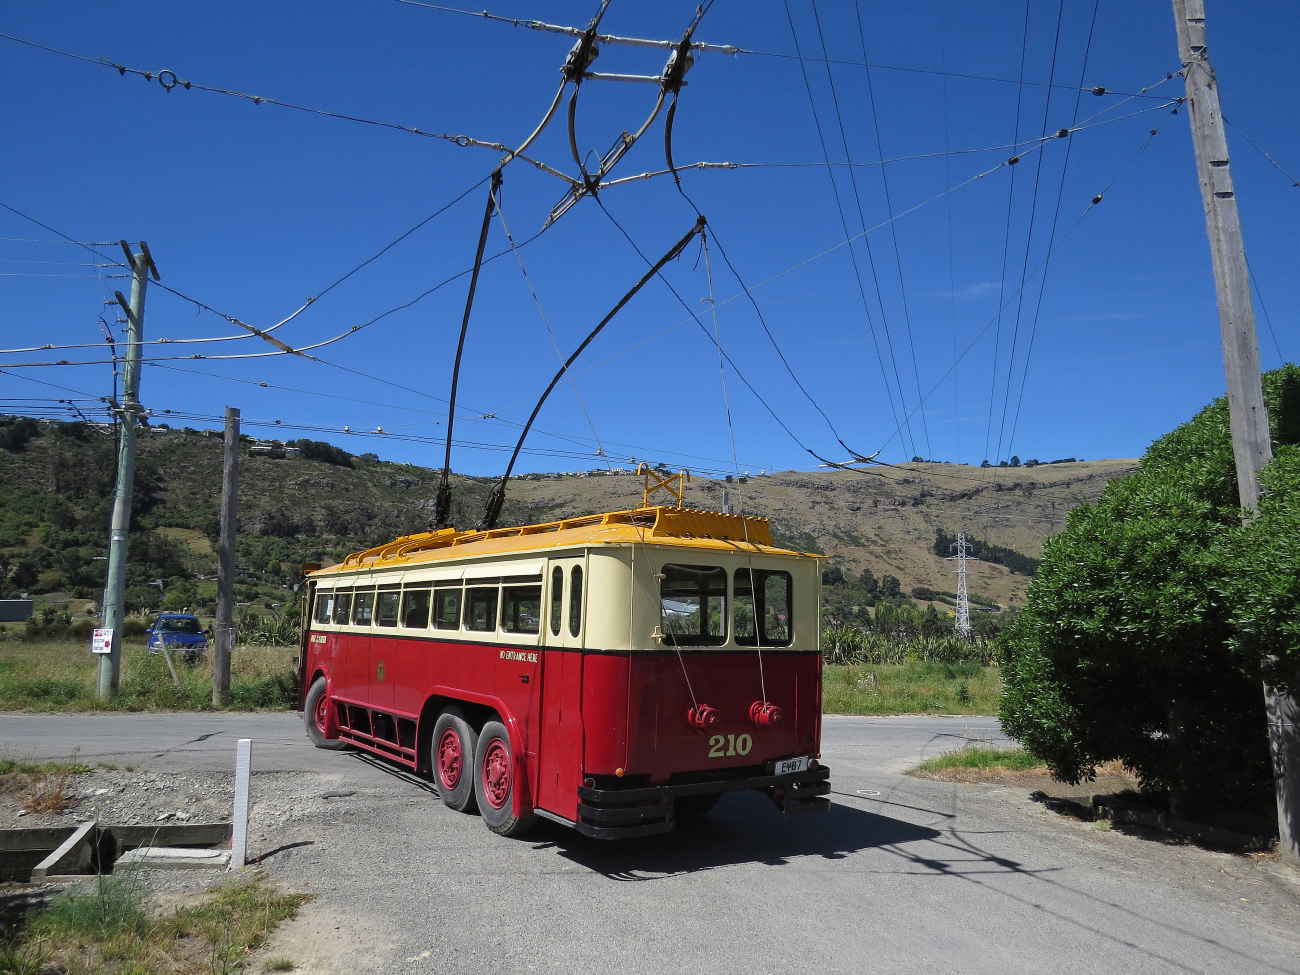 Ferrymead, English Electric č. 210; Ferrymead — Trolleybus Line and Infrastructure